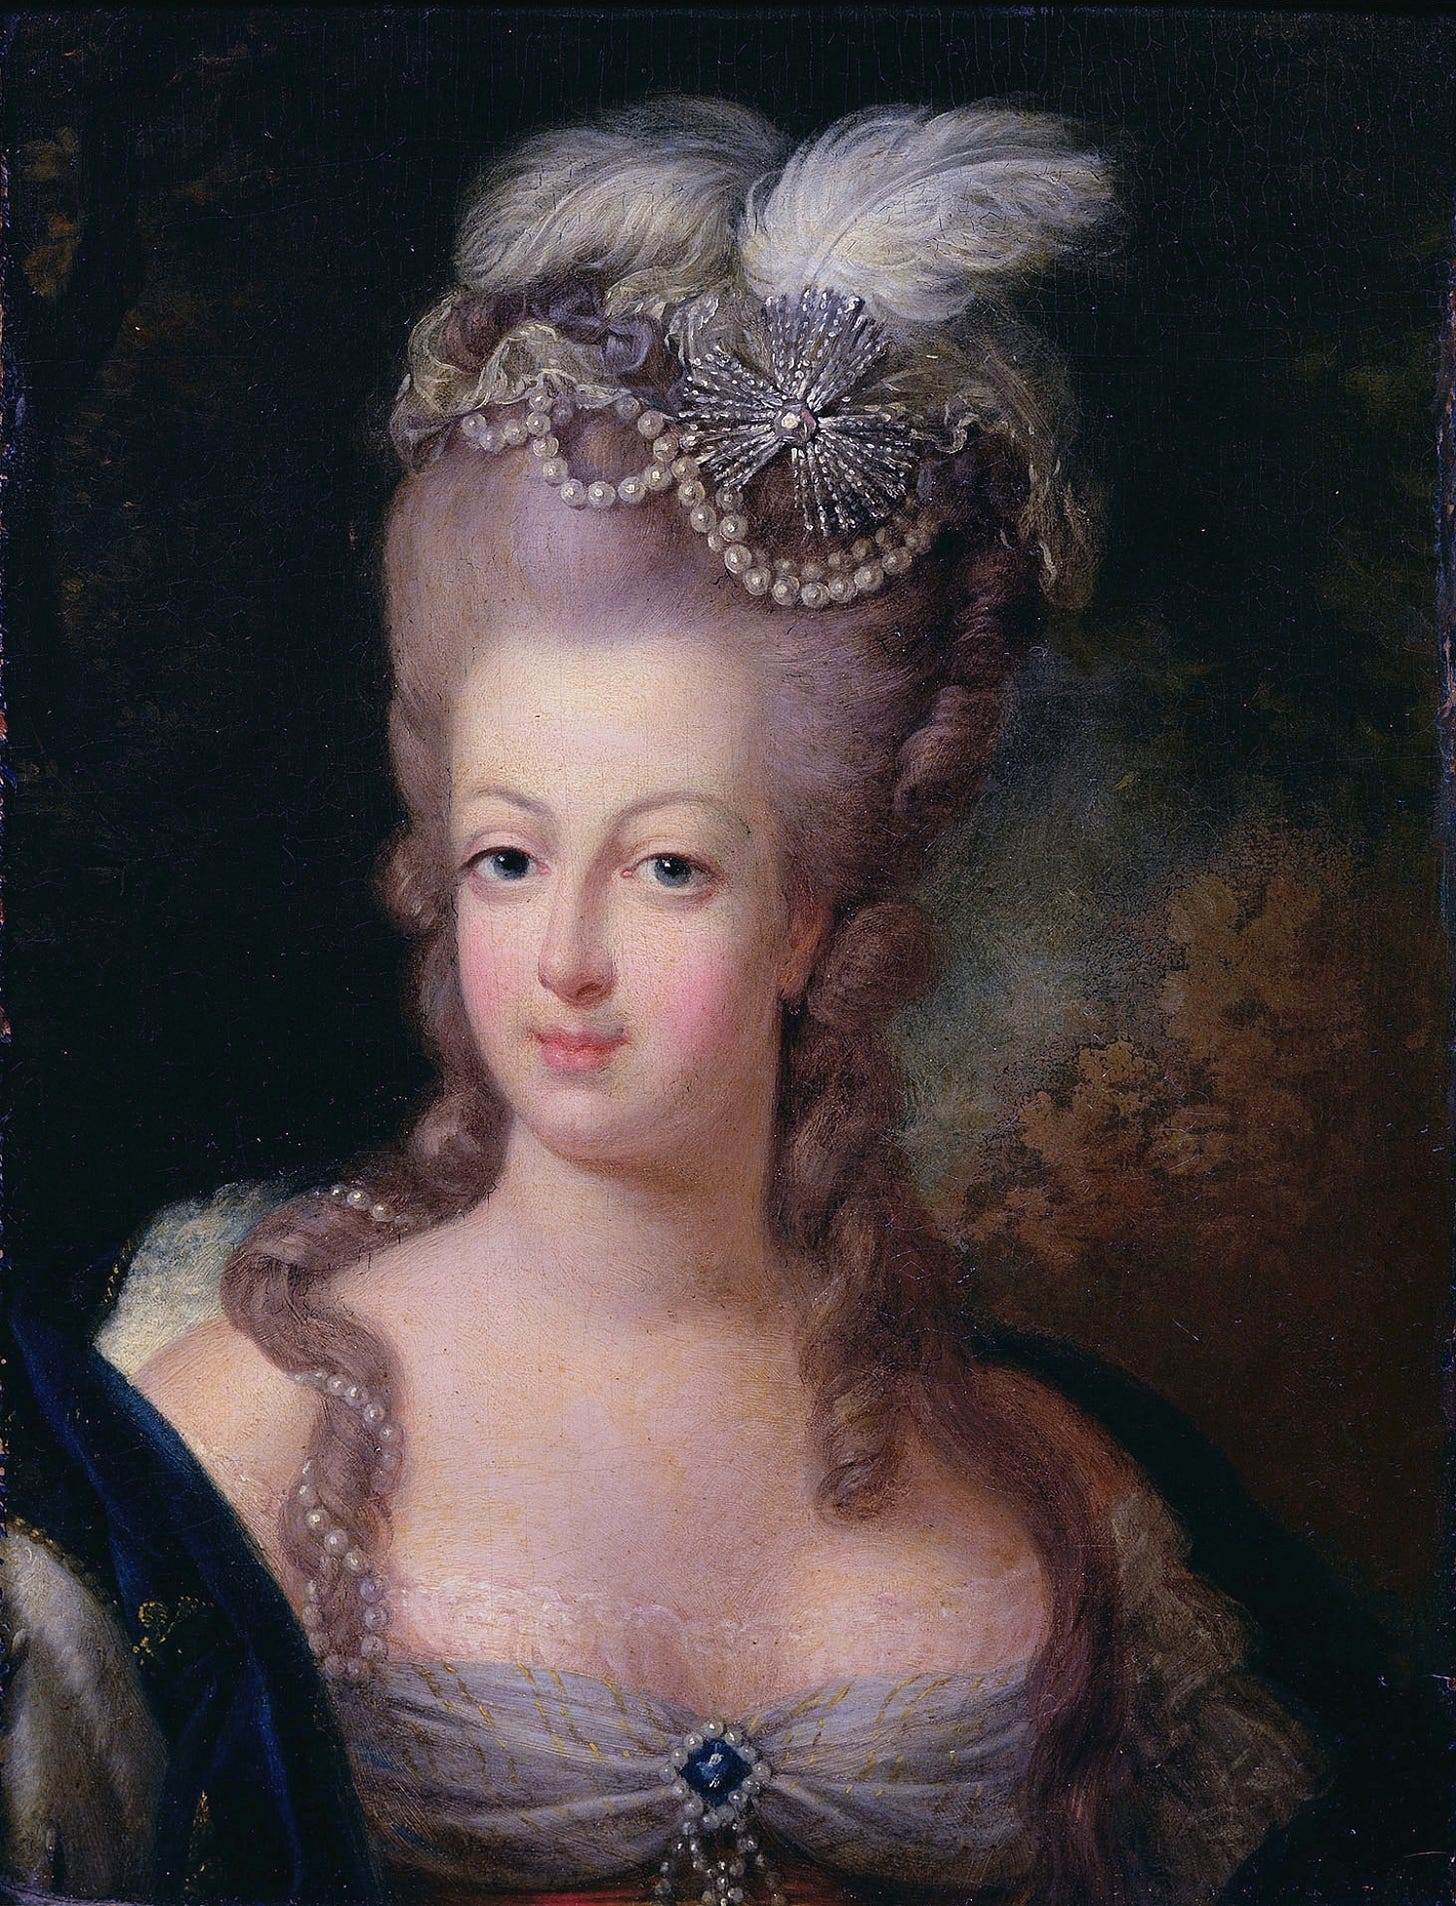 An oil painting of Marie Antoinette, a white woman wearing an ornate headdress.